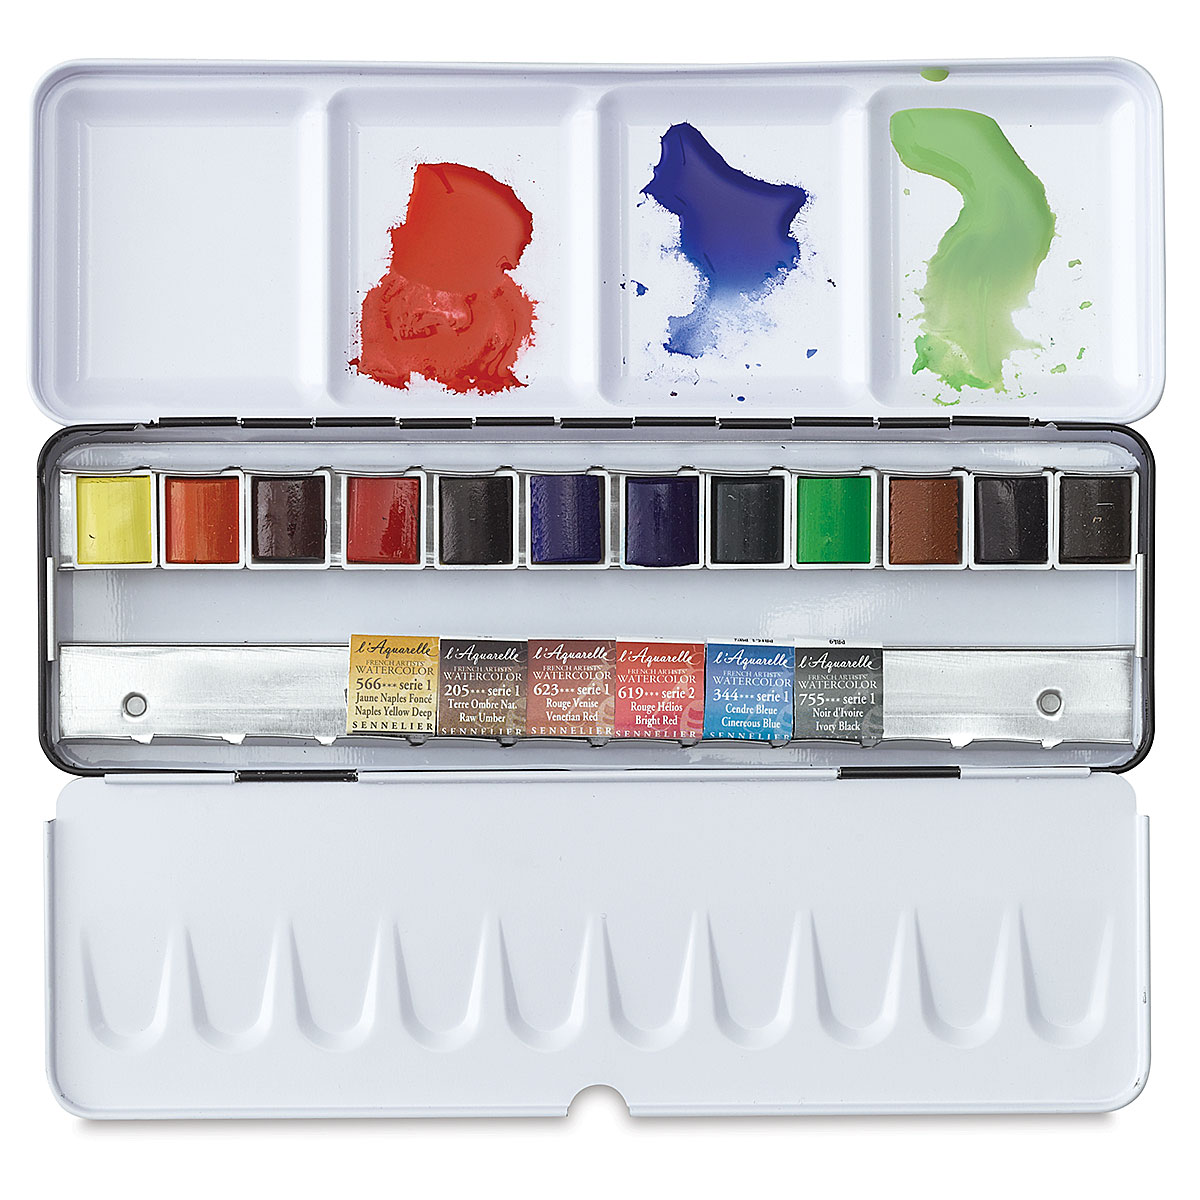 Sennelier French Artists Watercolor Paint Half Pans and Sets